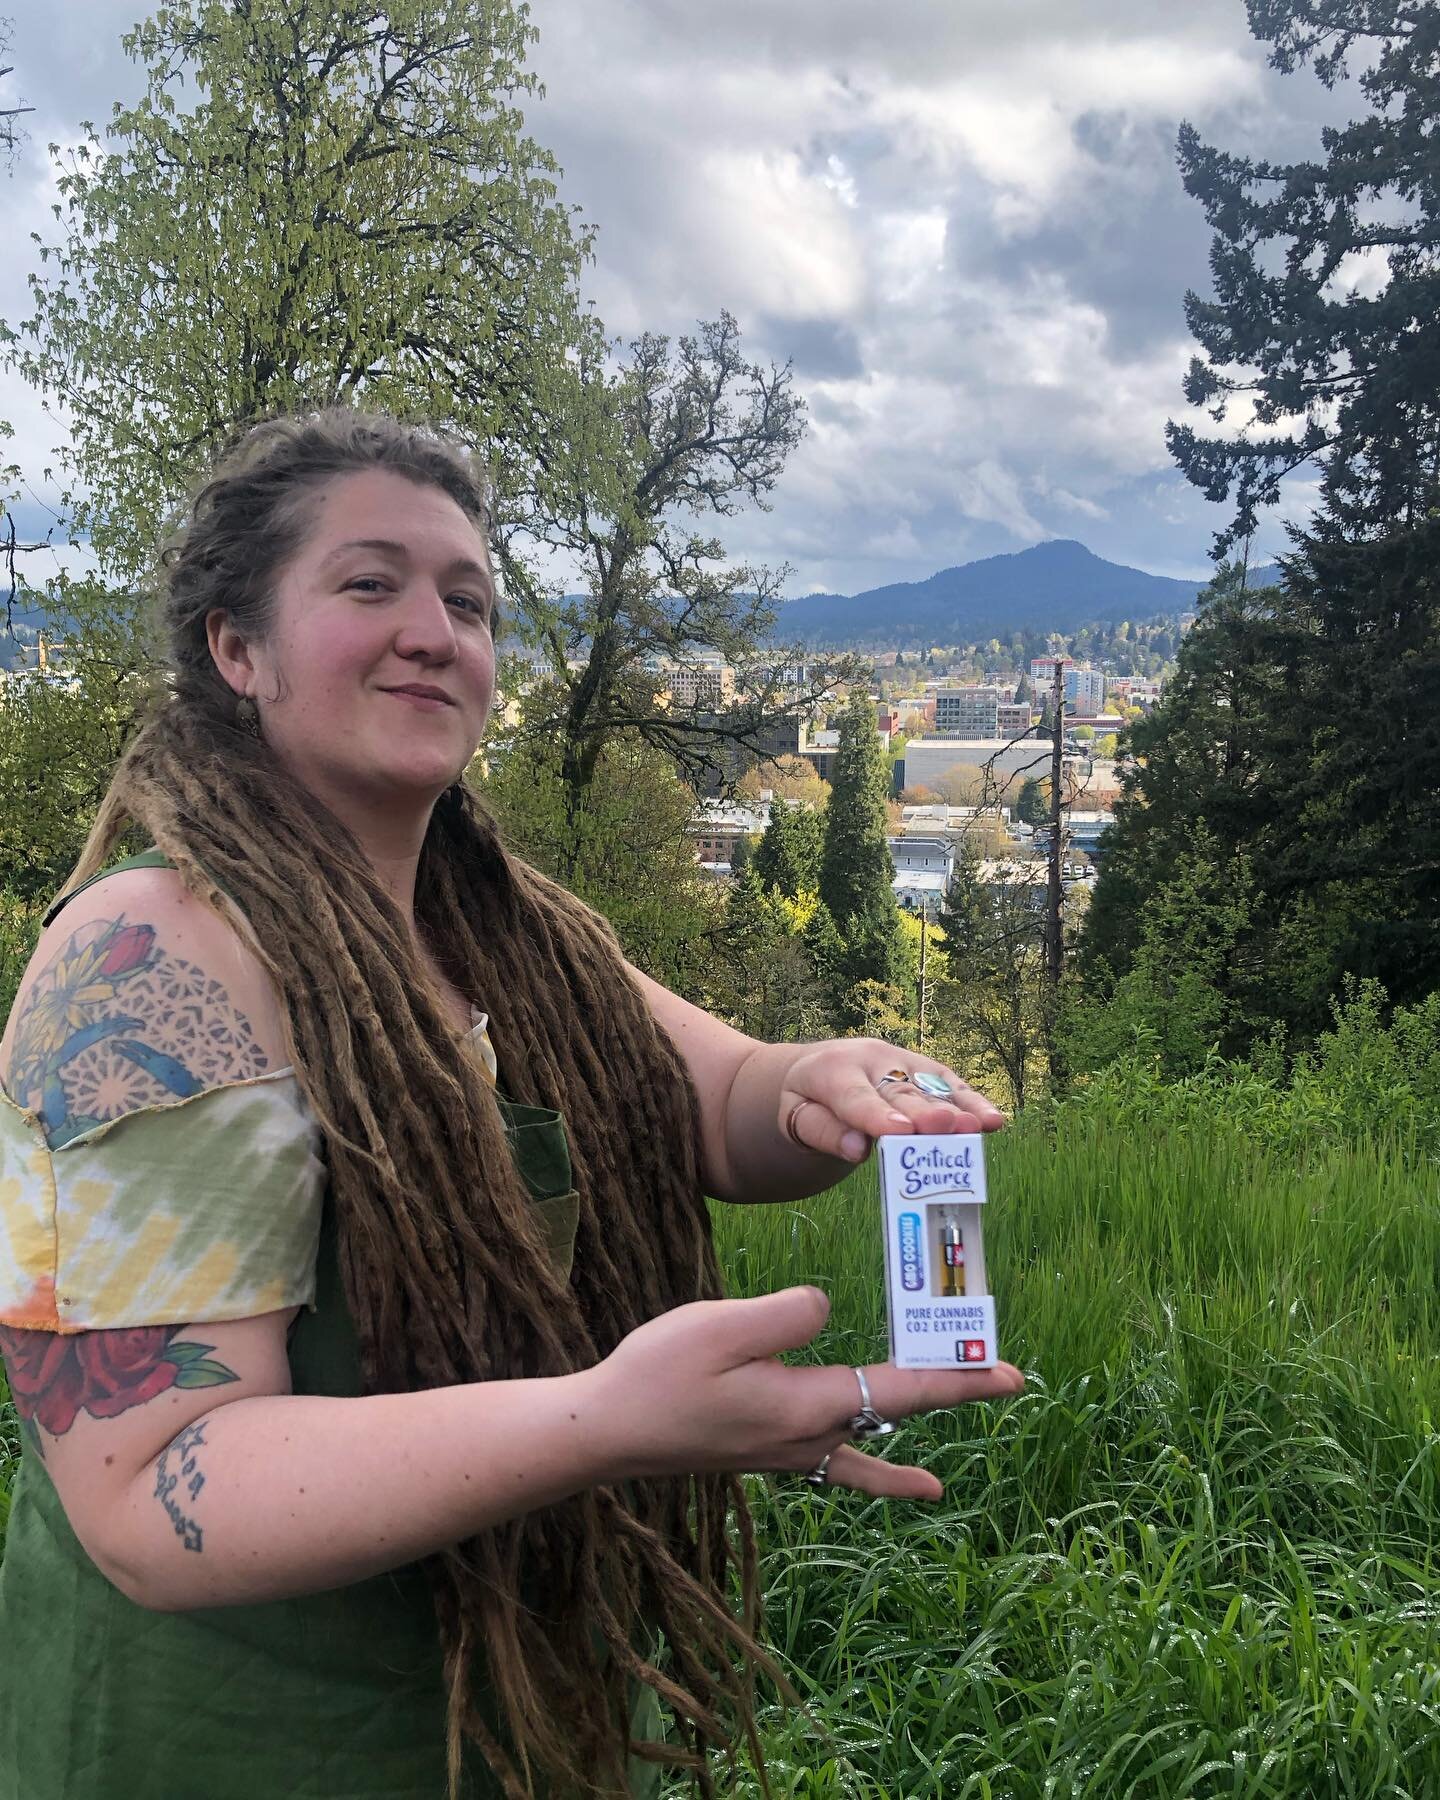 &ldquo;It&rsquo;s definitely my 4/20 choice.&rdquo; @jujubeegrateful 

#criticalsource #olcc #extracts #fullspectrum #gmocookies #kief #420 #antiochgold 

Do not operate a vehicle or machinery under the influence of this drug.  For use only by adults